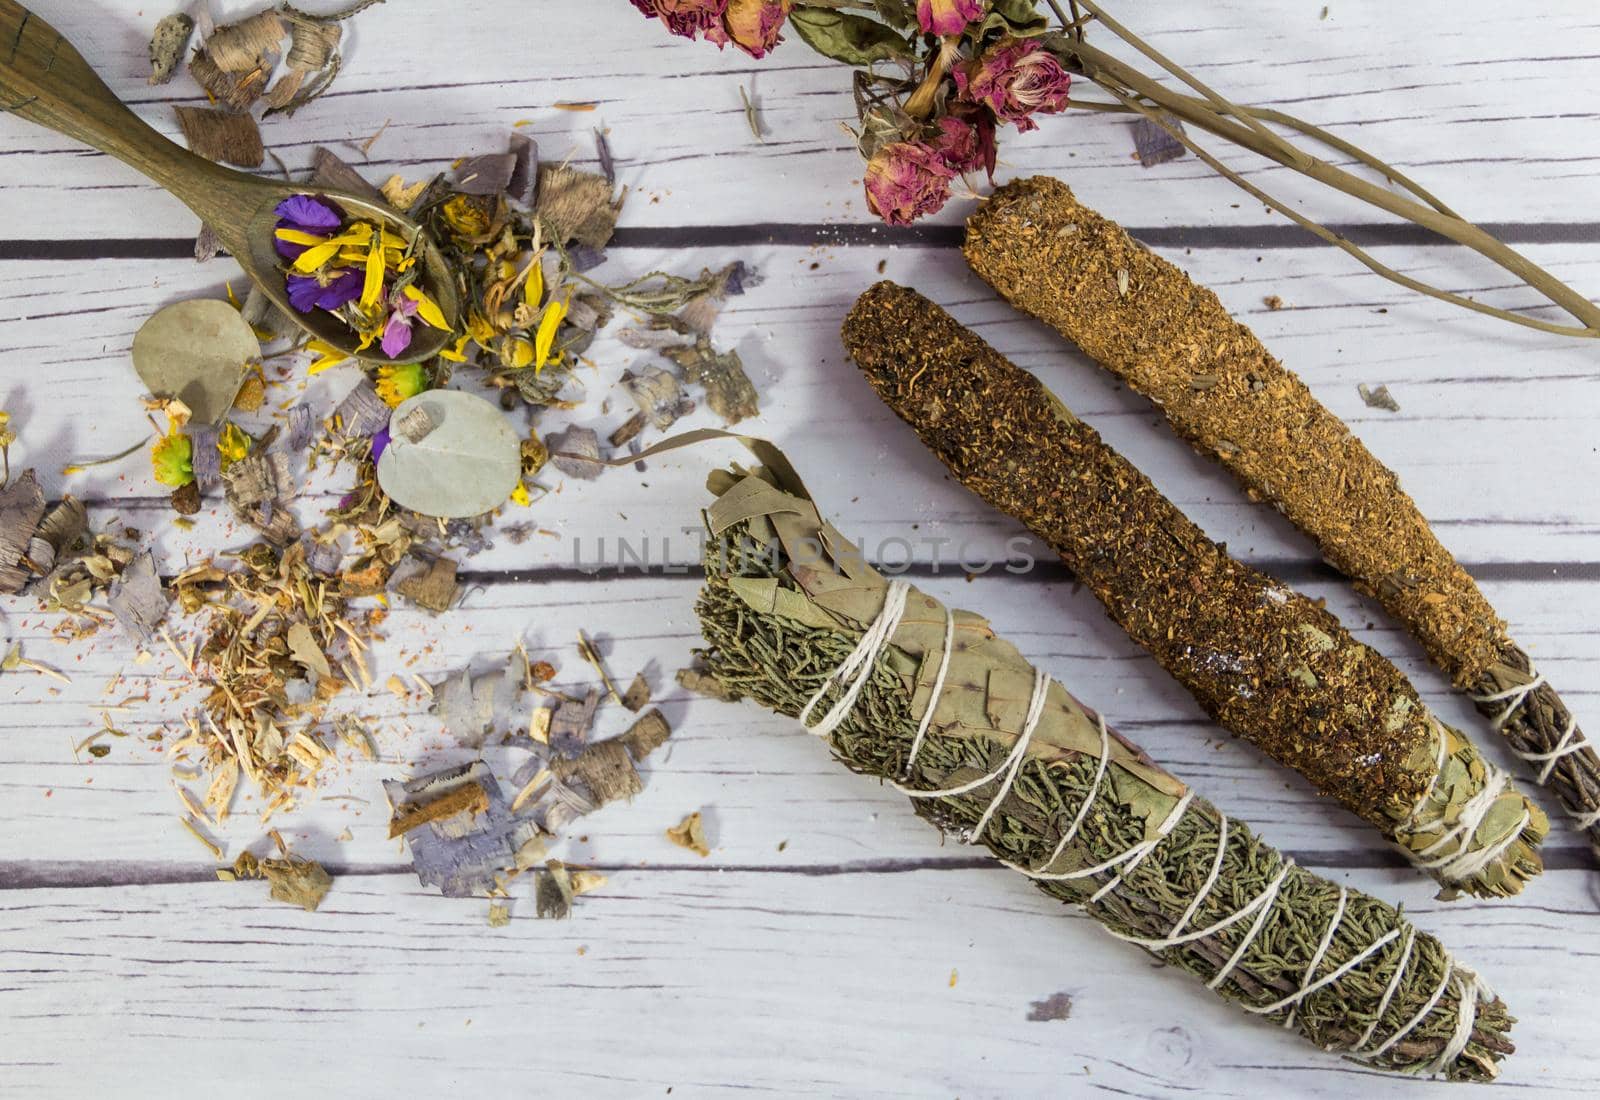 Sahumos, handmade incenses made with herbs and flowers, For cleaning rituals by GabrielaBertolini